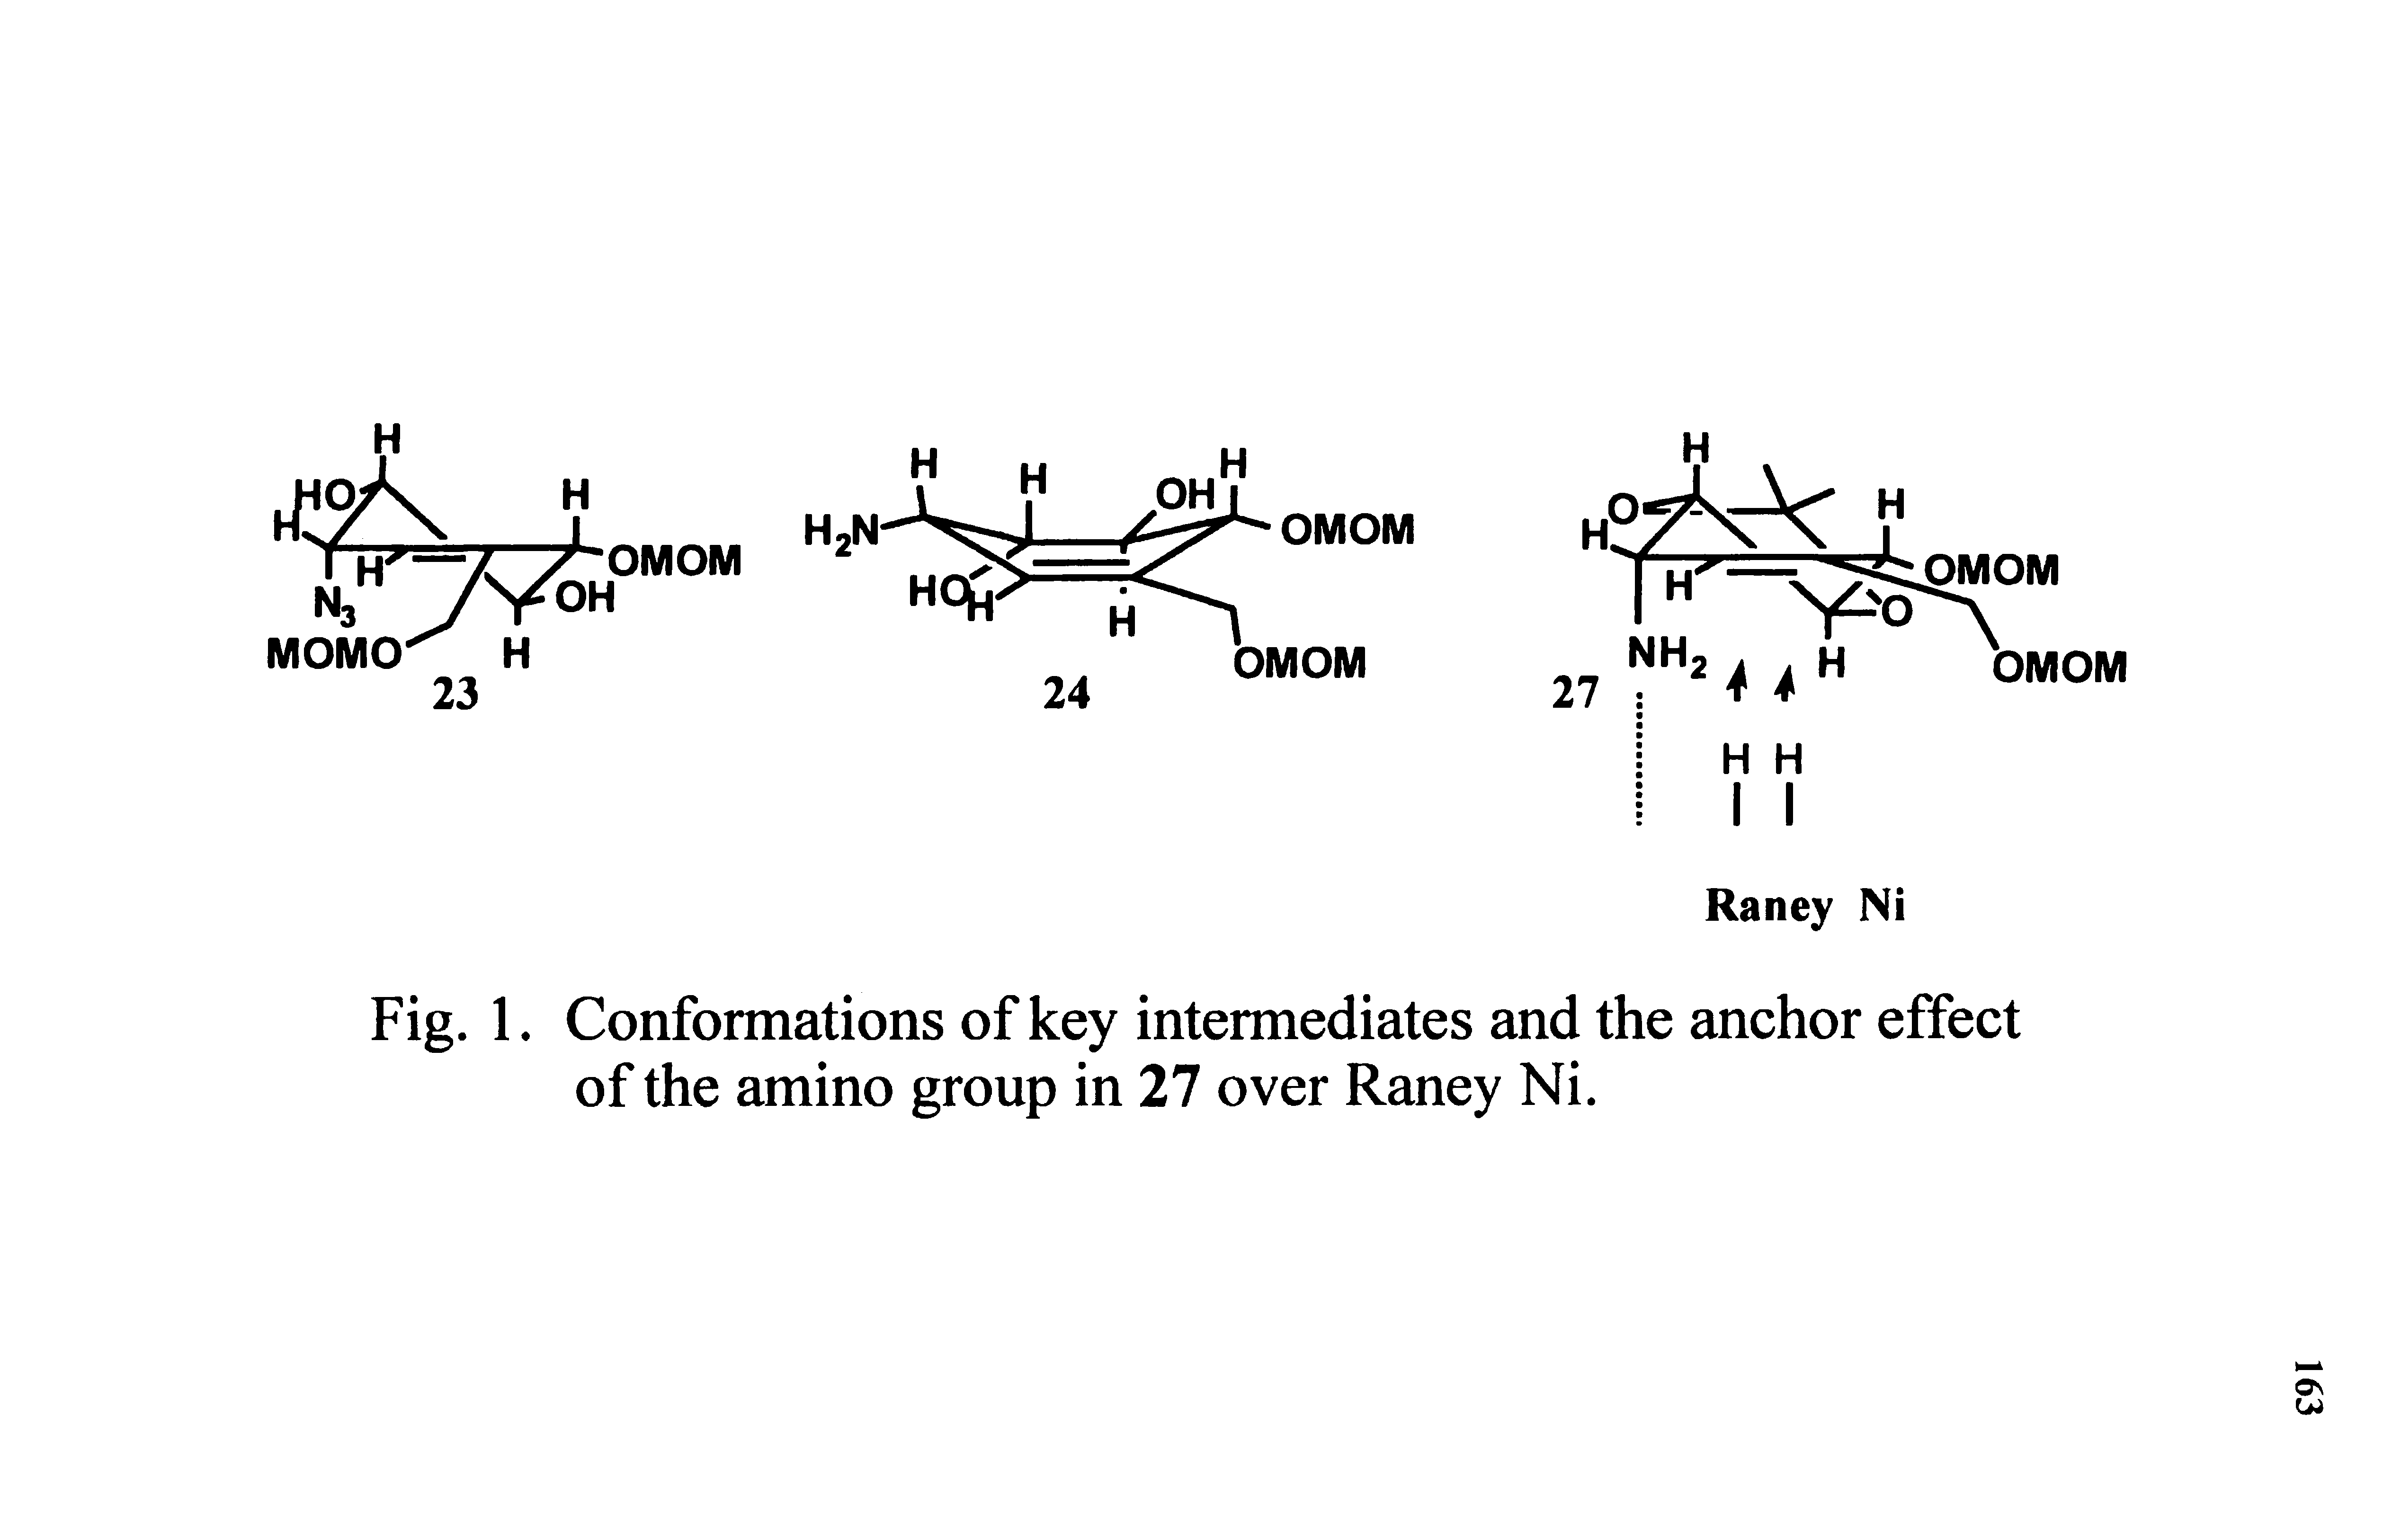 Fig. 1. Conformations of key intermediates and the anchor effect of the amino group in 27 over Raney Ni.